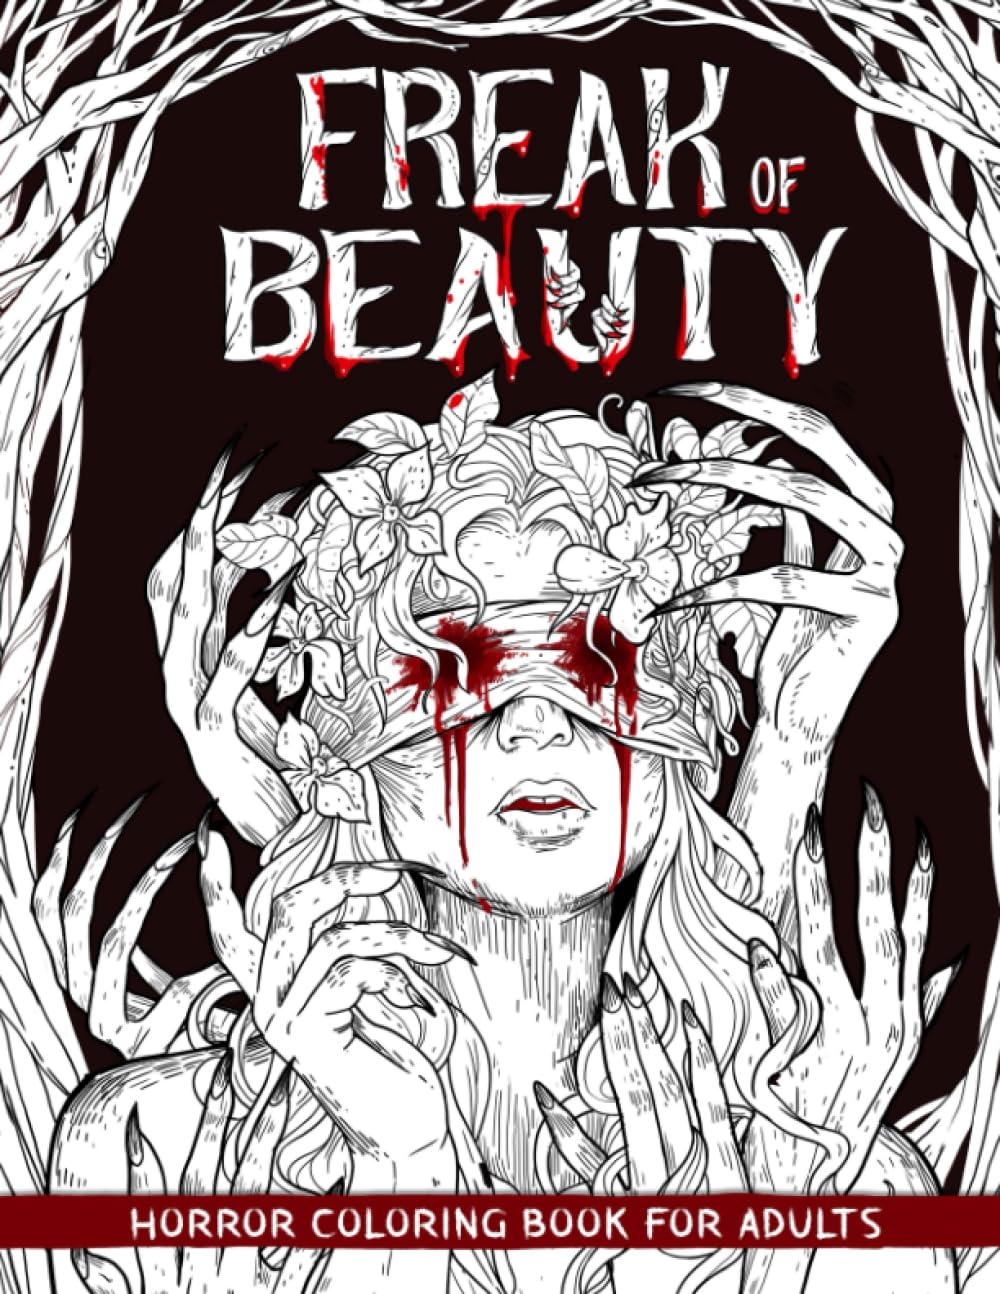 Freak of bety horror coloring book for adults stralia ubuy